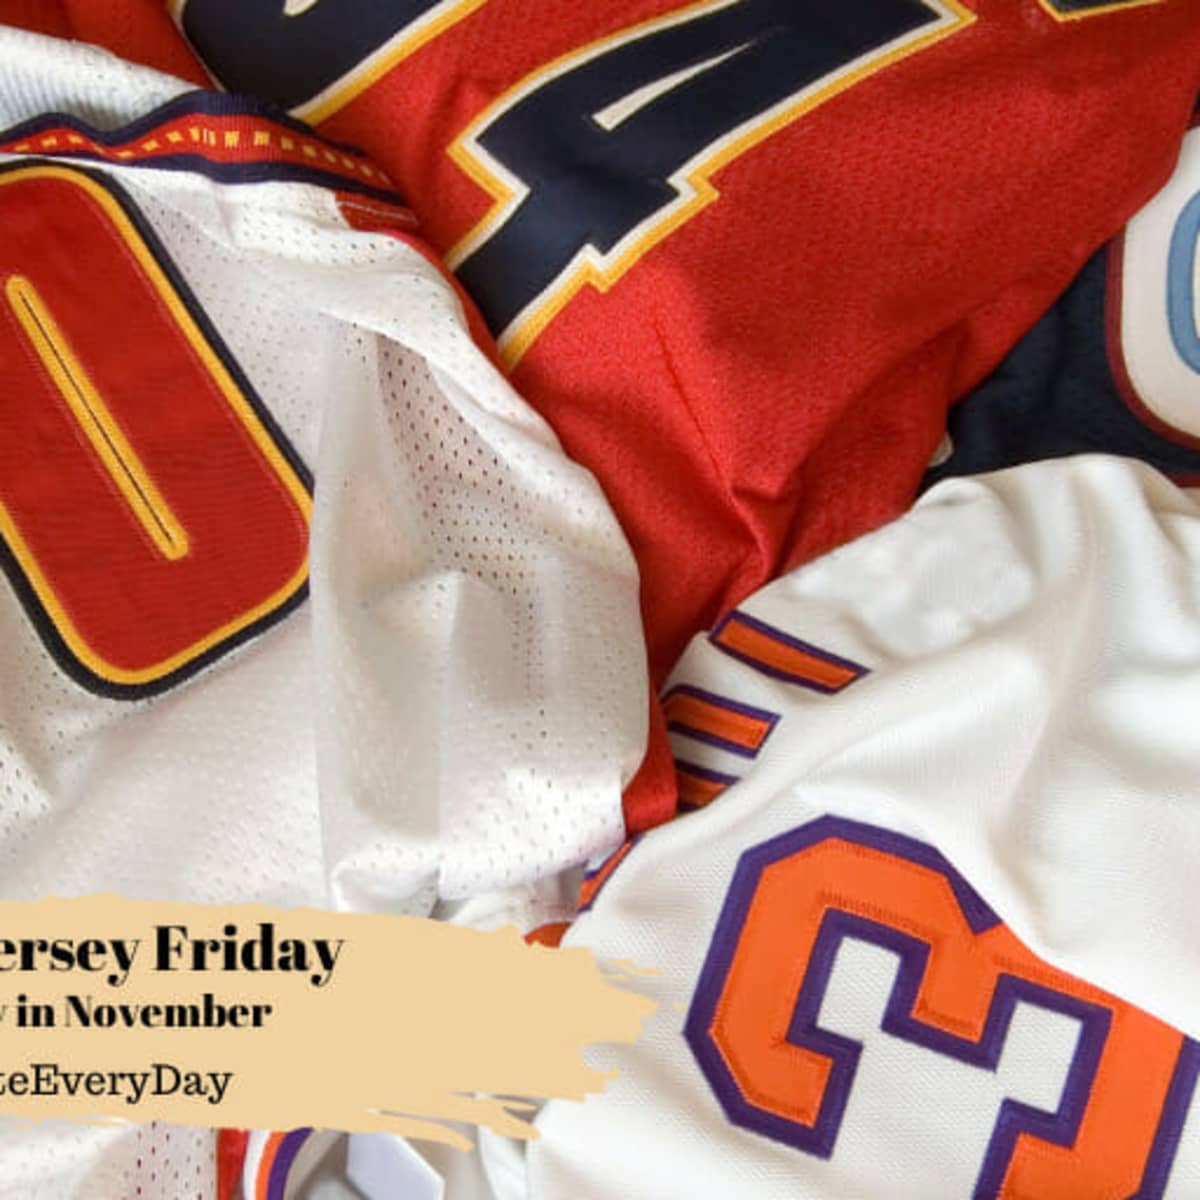 NATIONAL JERSEY FRIDAY - First Friday in November - National Day